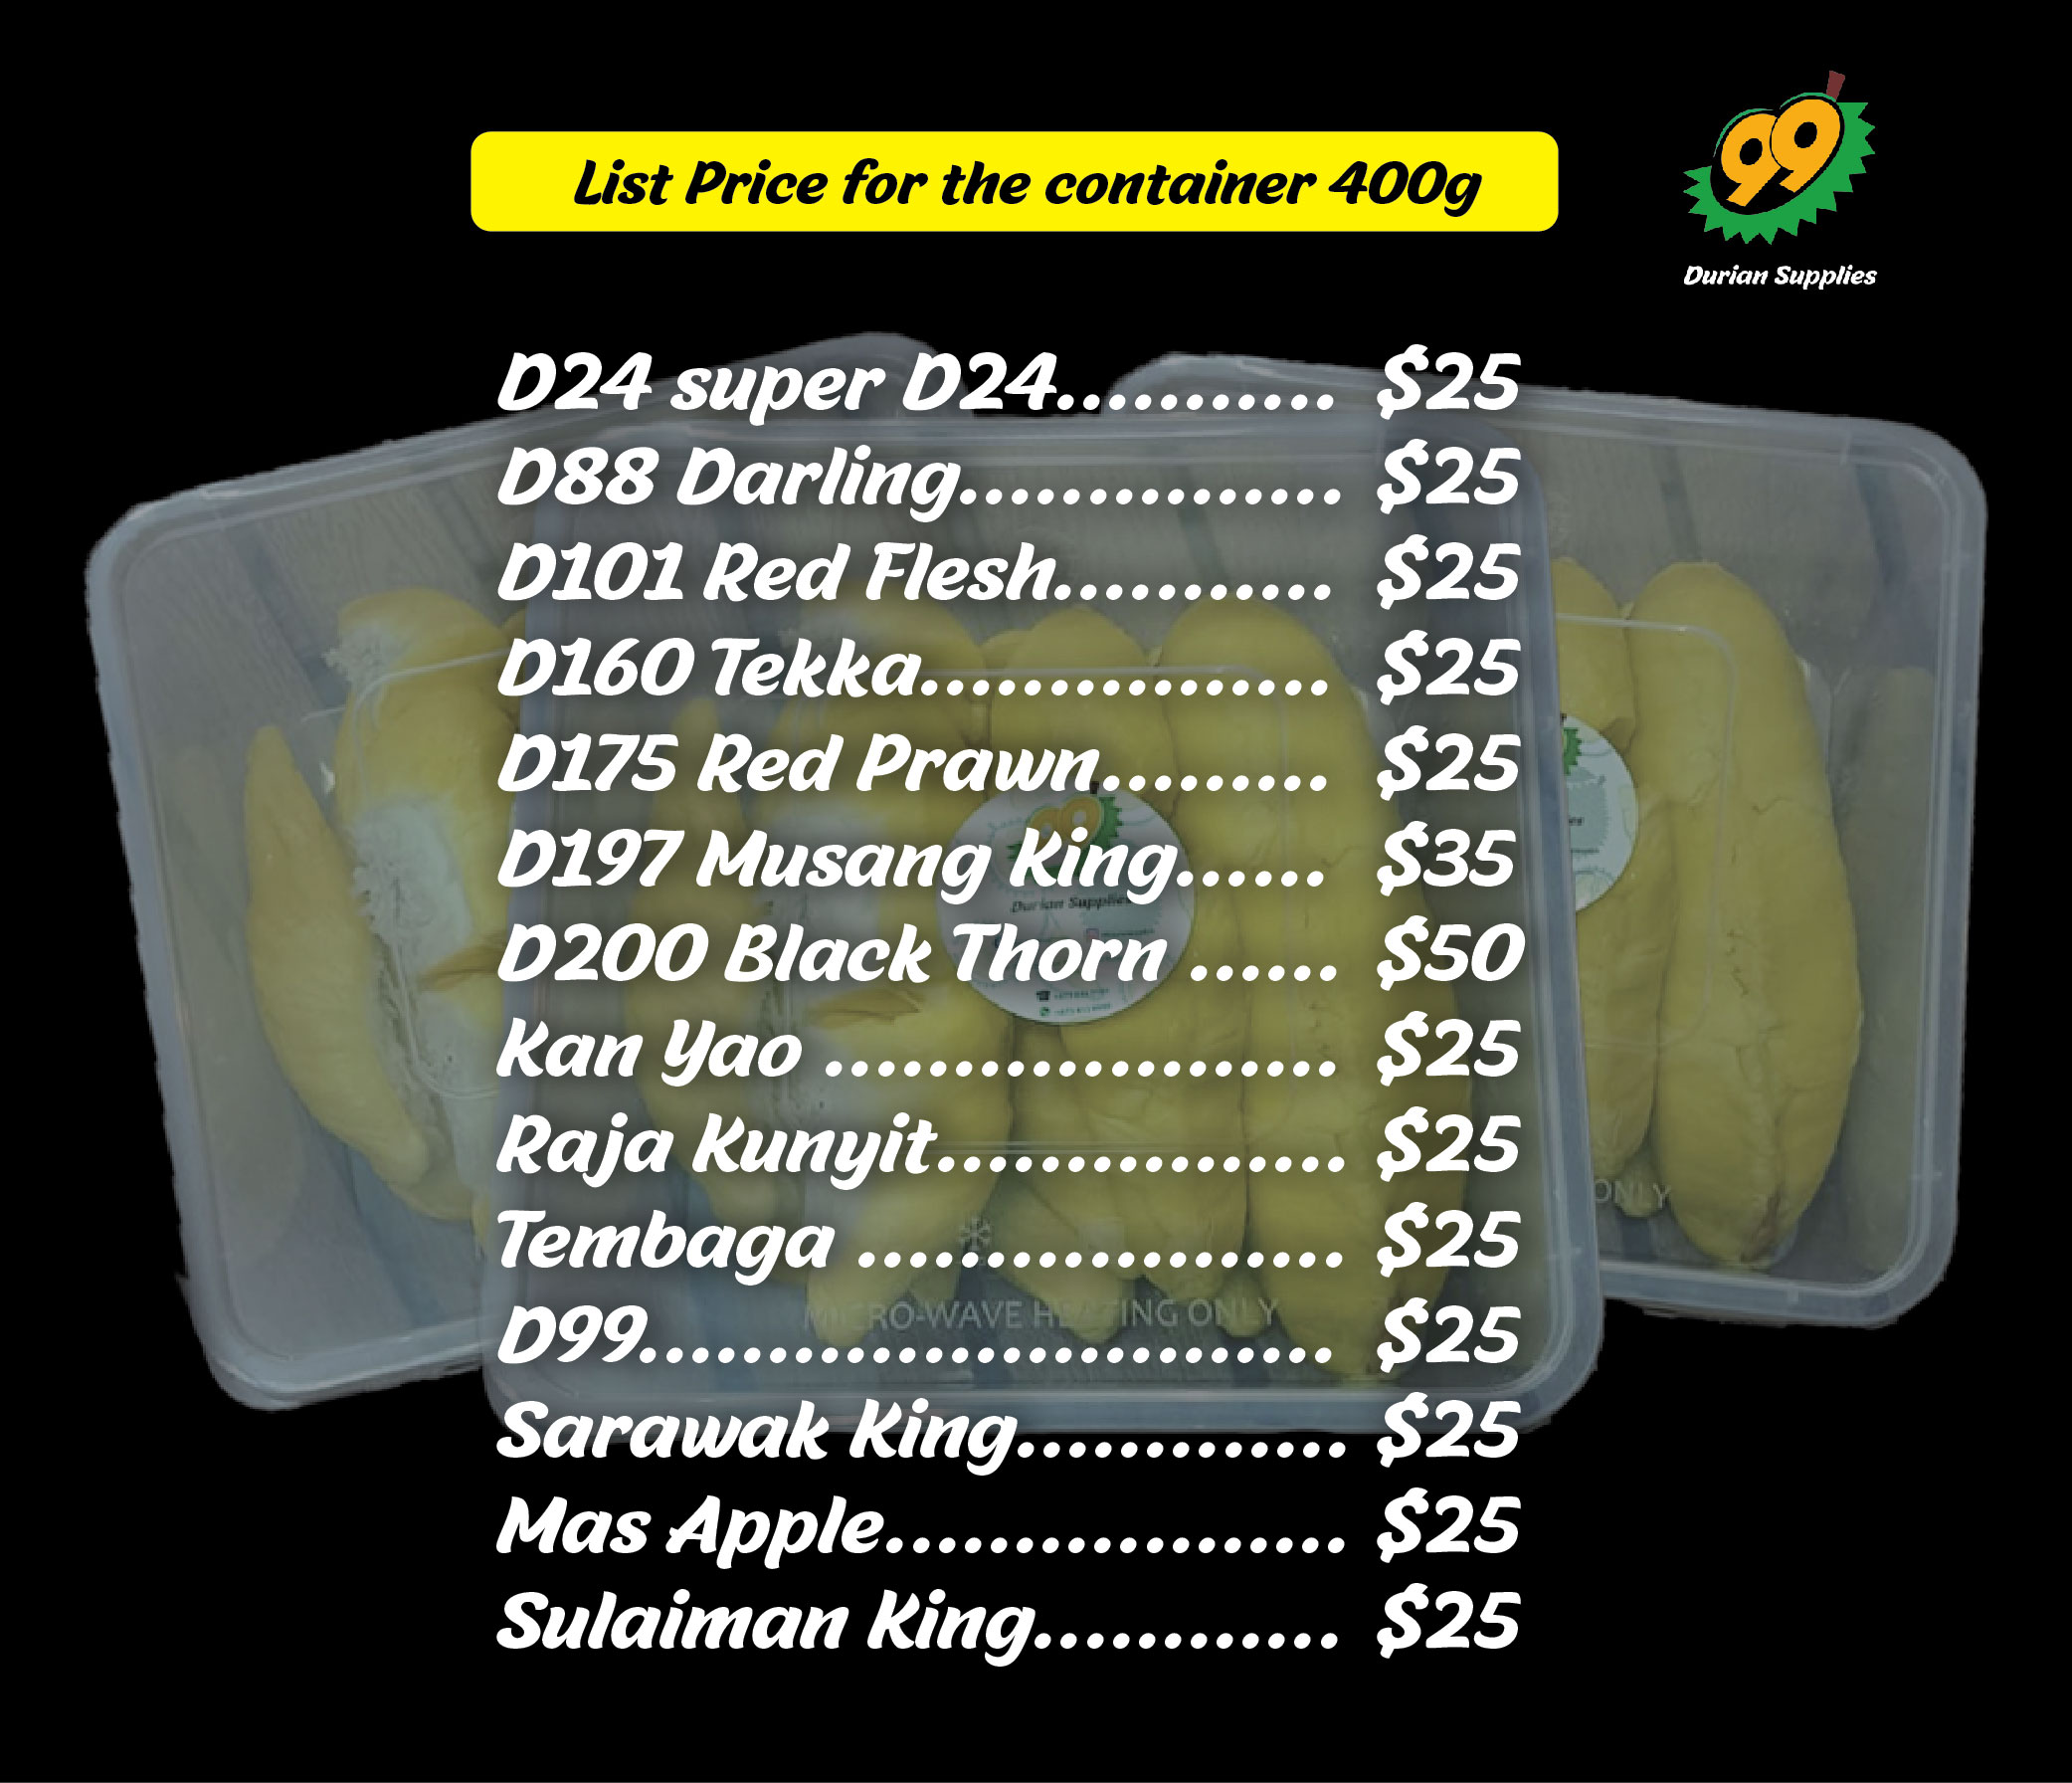 Price list for container 400g